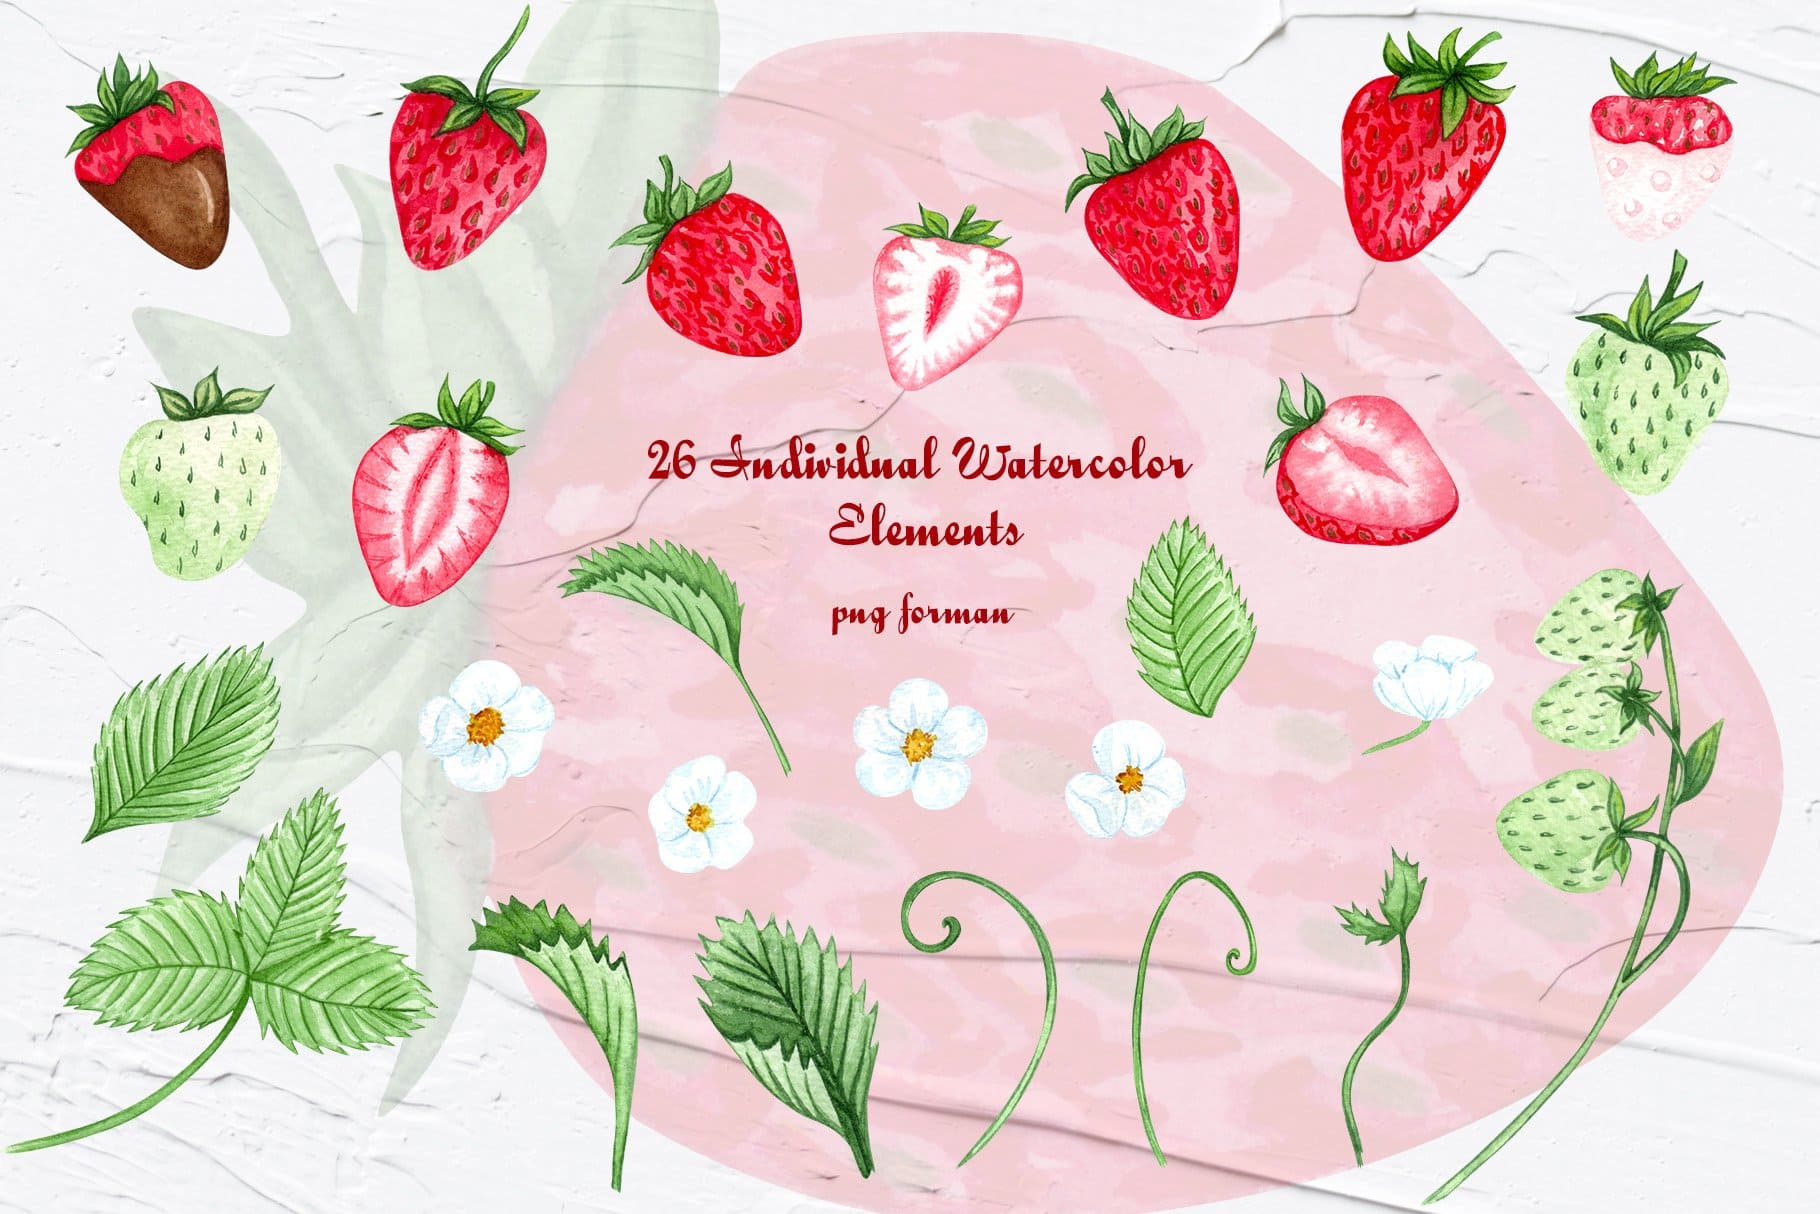 26 individual watercolor elements with ripe strawberries and more.